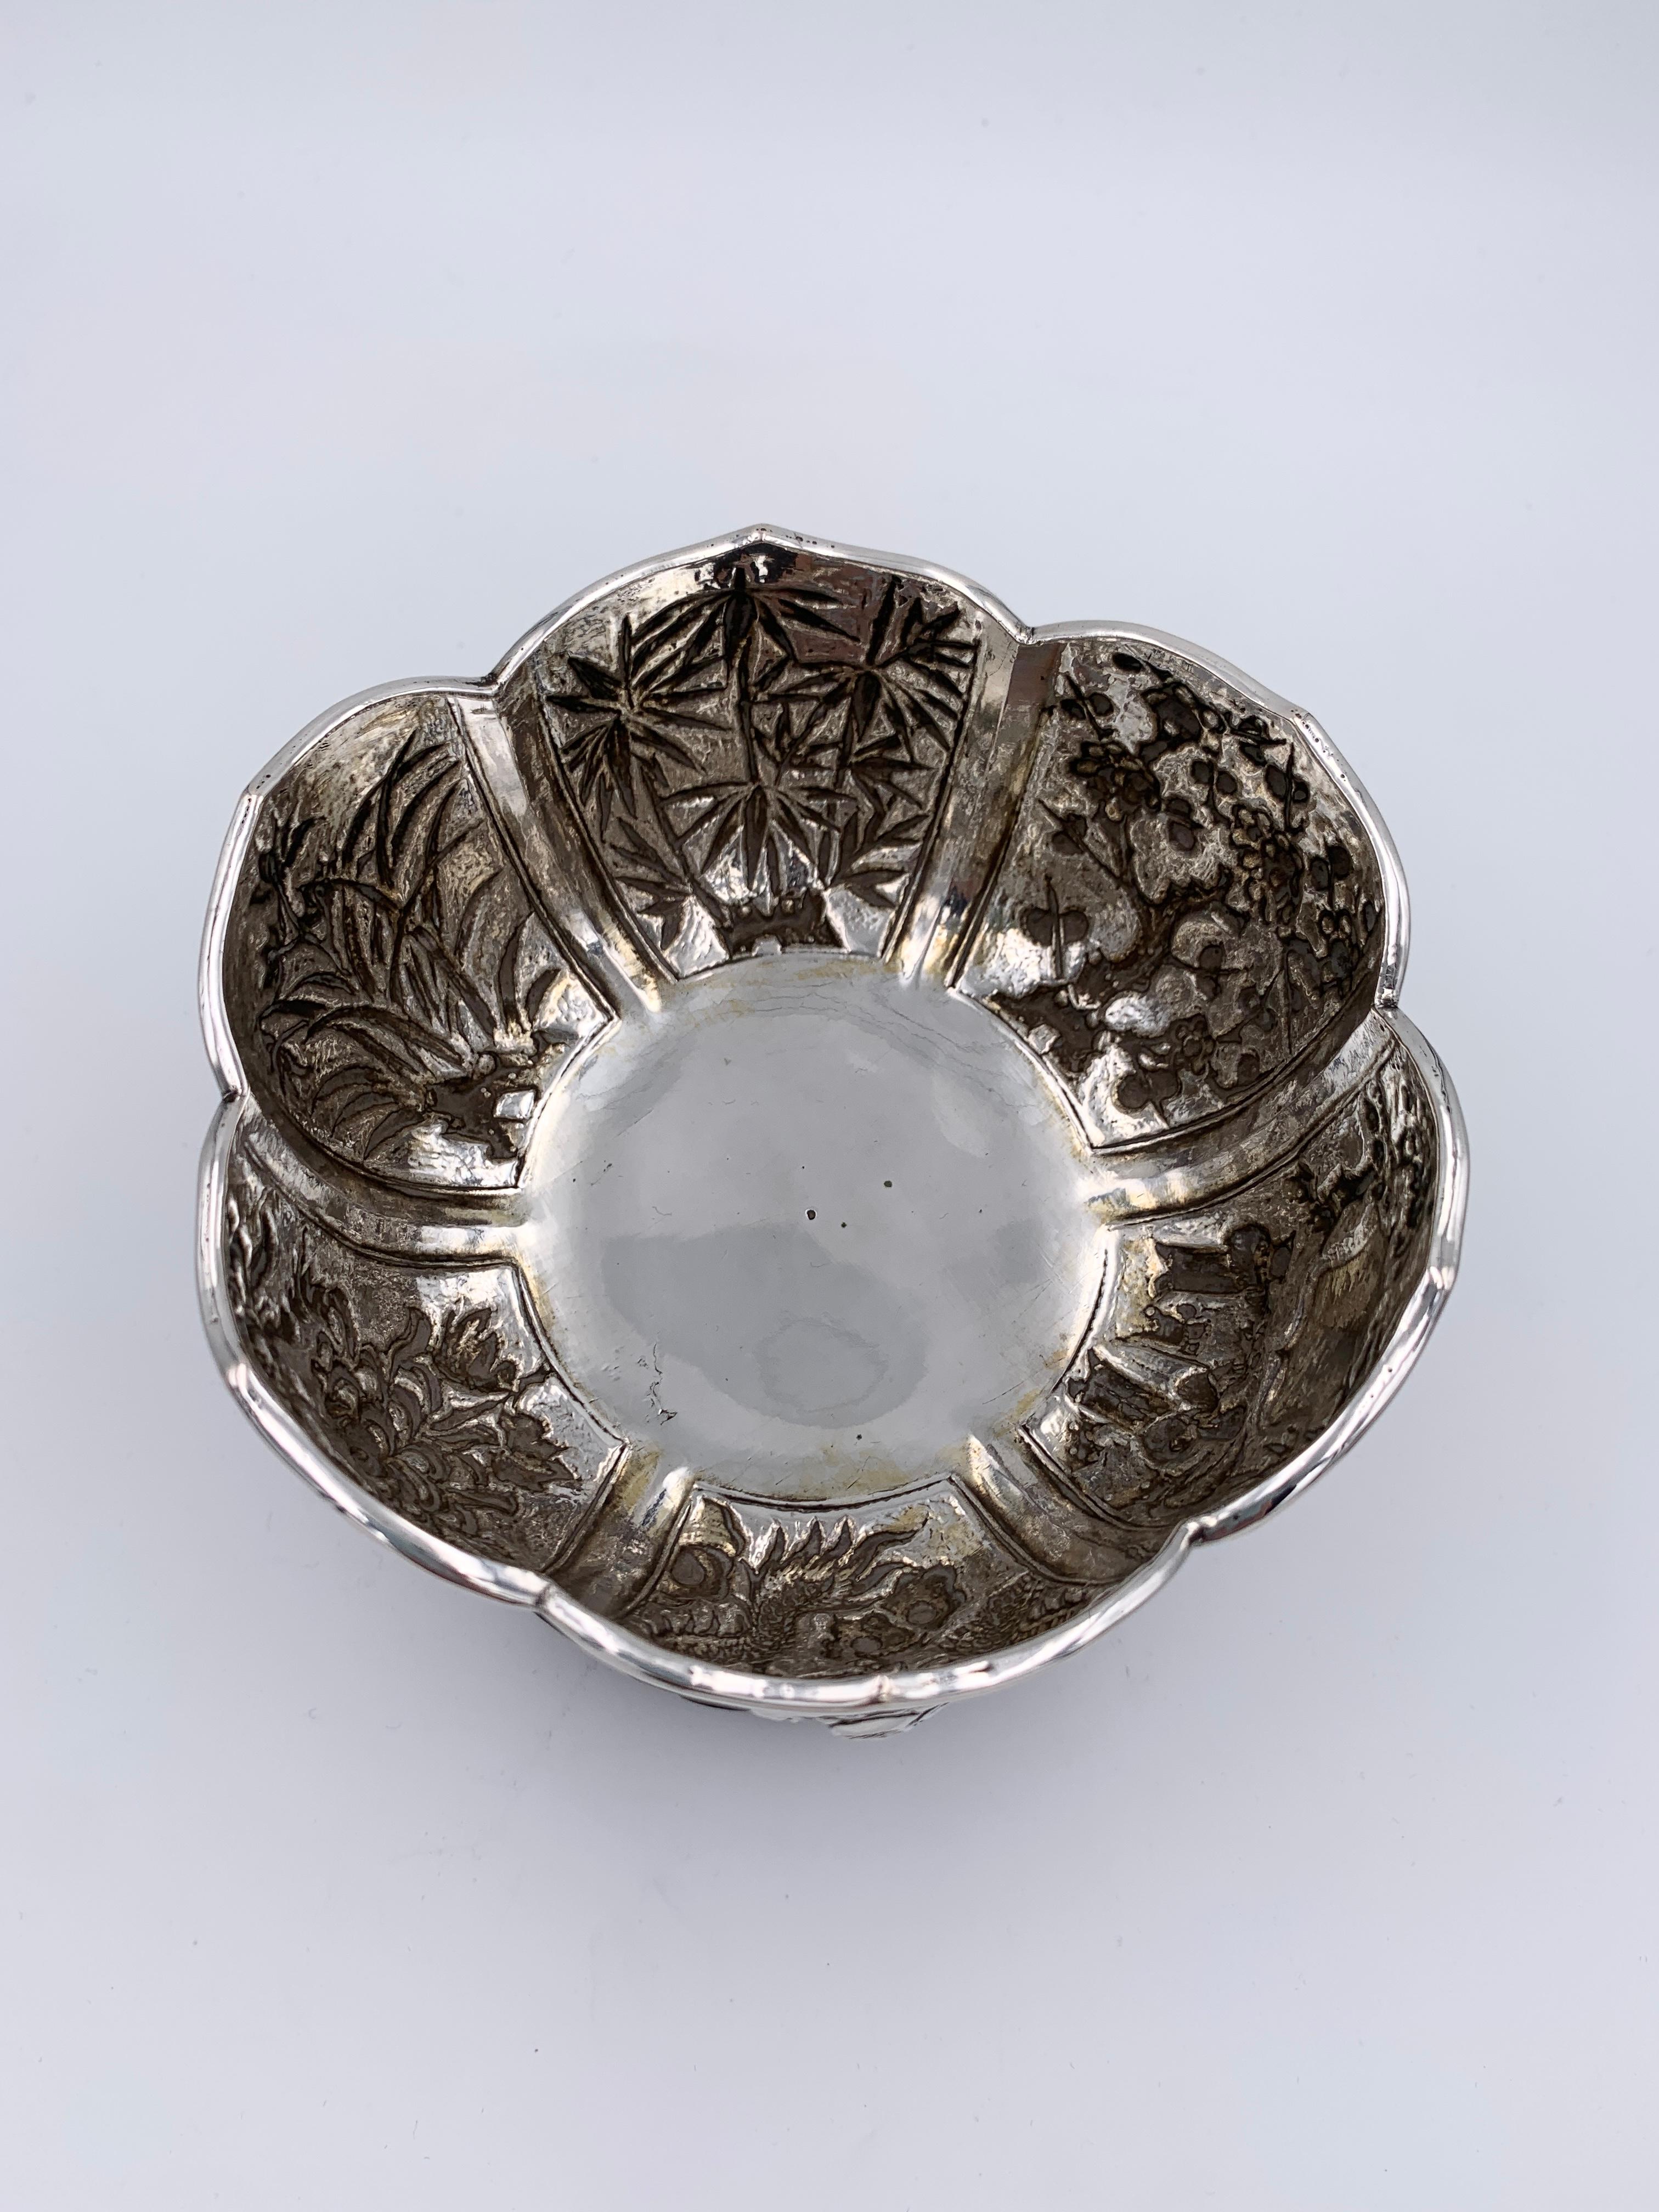 A Pair of Chinese Export Silver Bowls on original wood stands, circa 1880. Both bowls composed of six lotus-shaped panels, sit on a stand with openwork cloud carving. Each panel is embossed and chased, four with plum blossom, orchid, bamboo, and